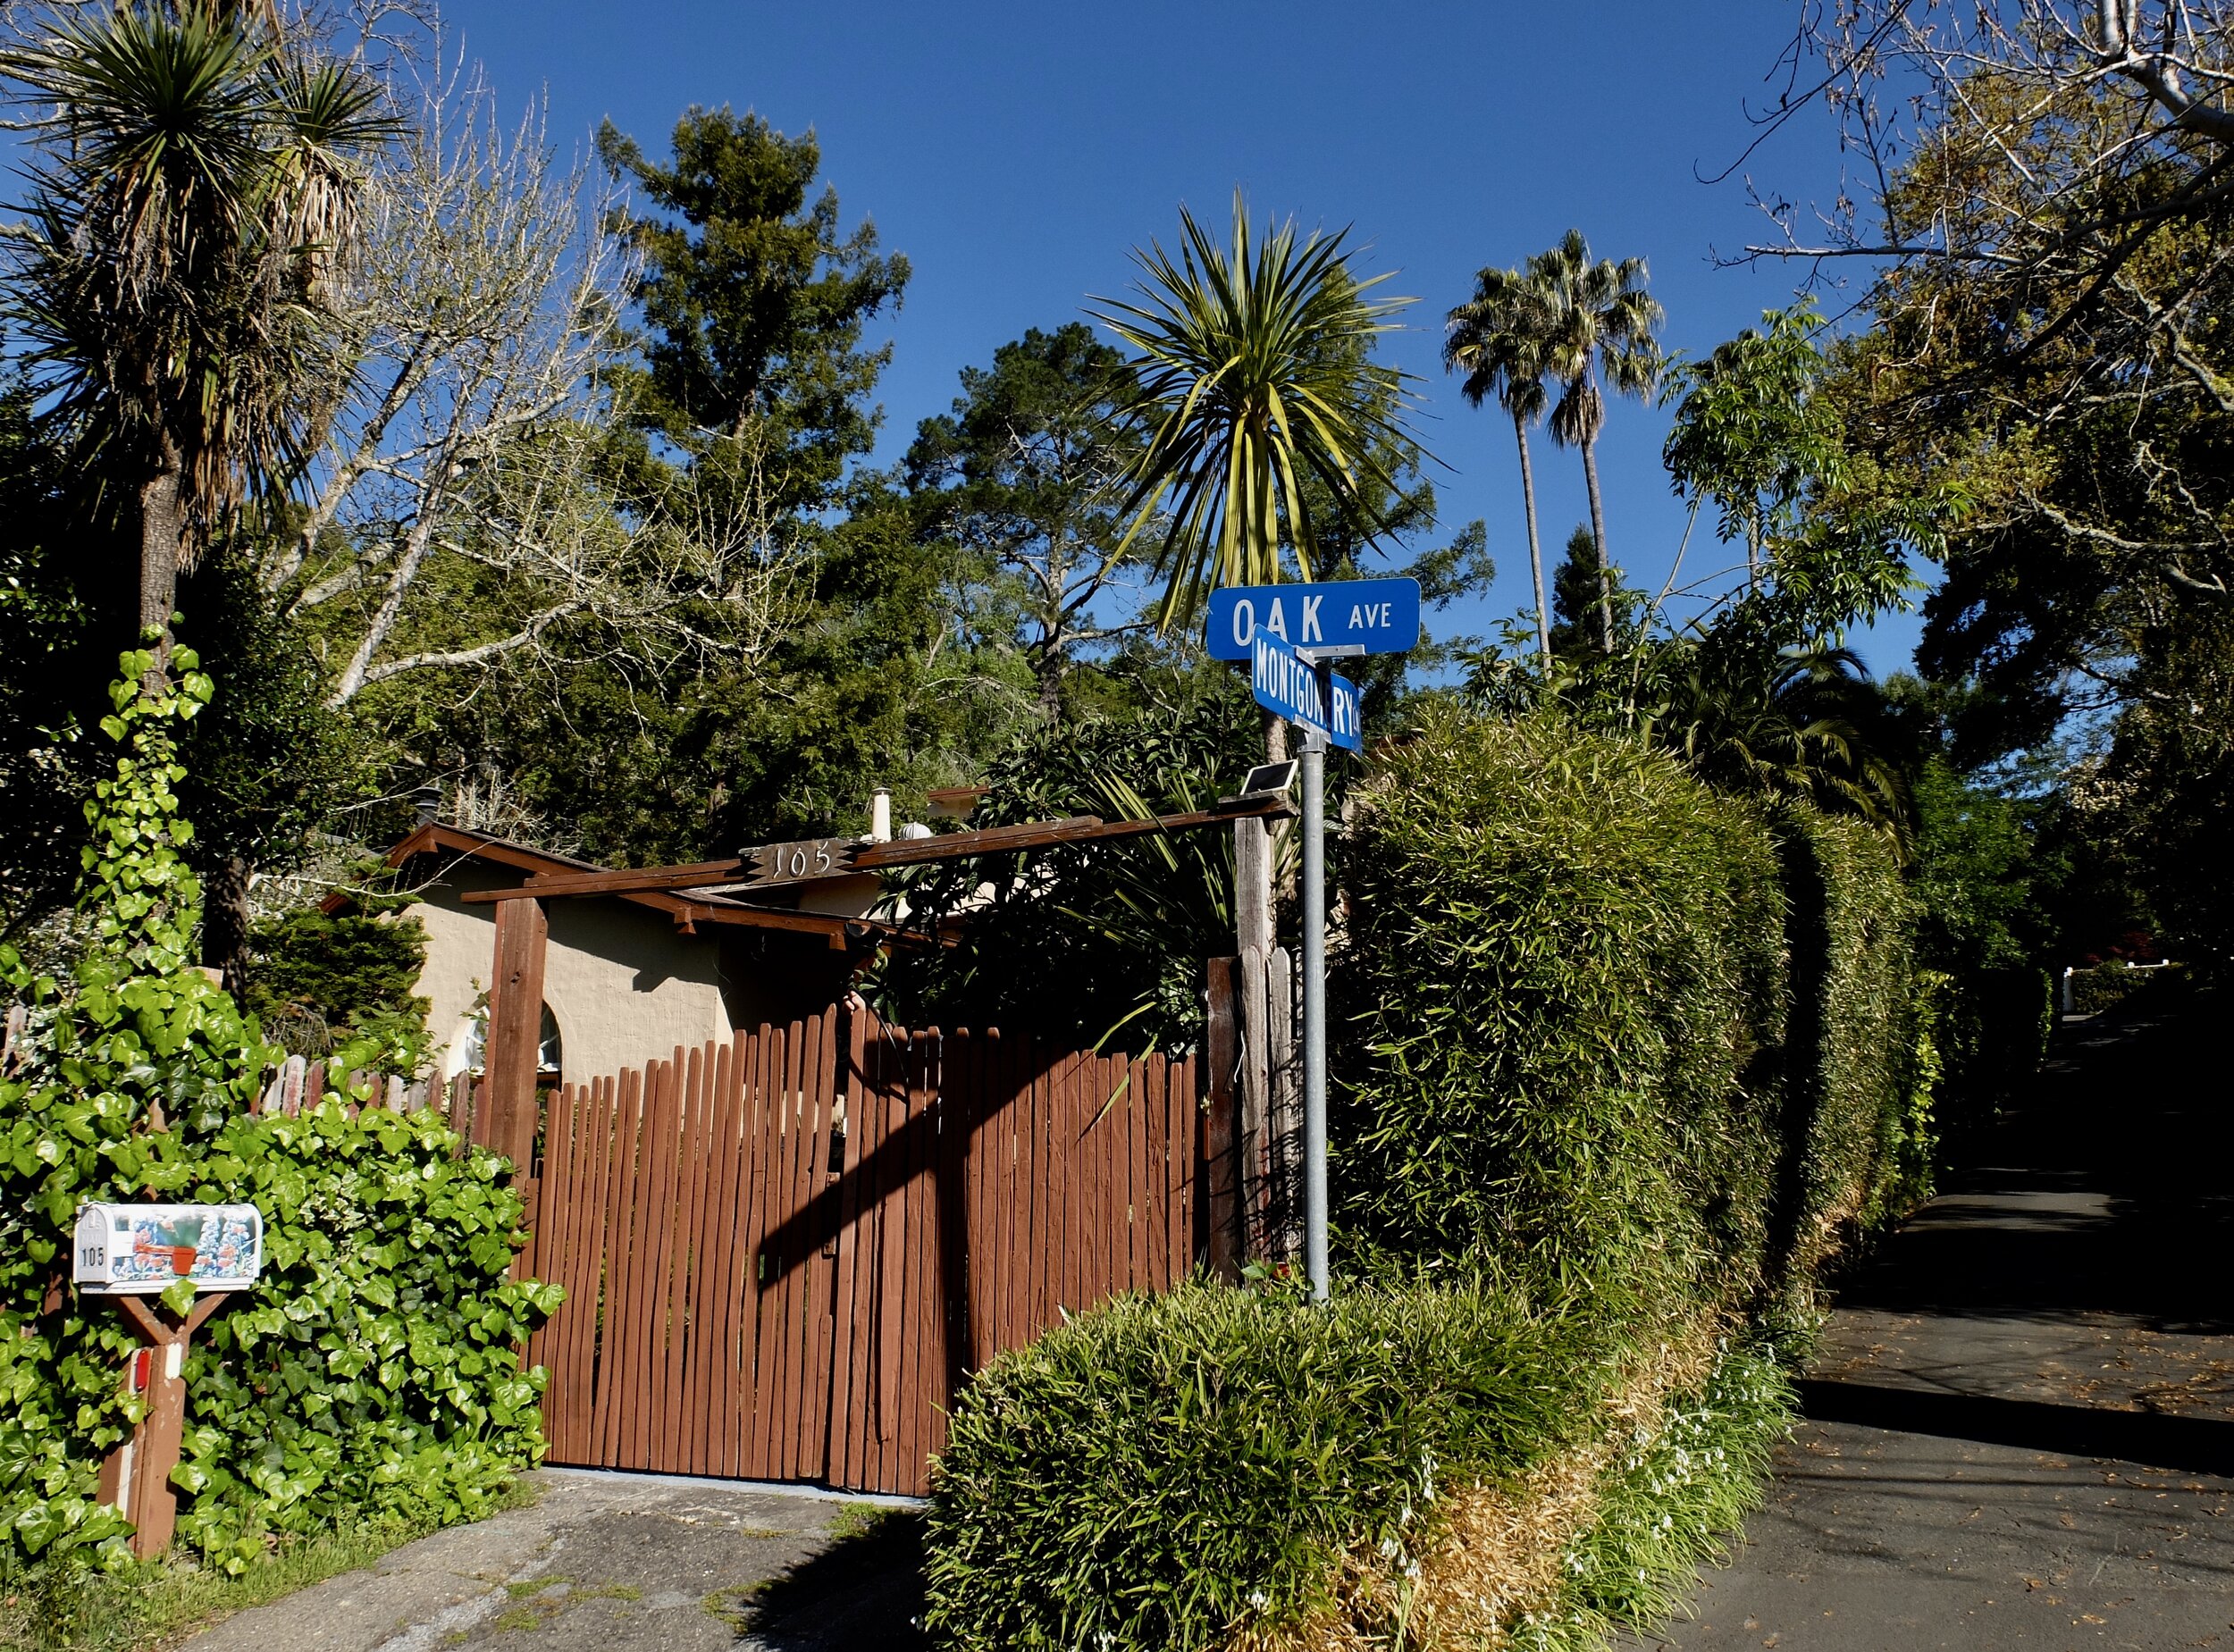 Many of the older homes in this Larkspur neighborhood were summer homes for San Franciscans.